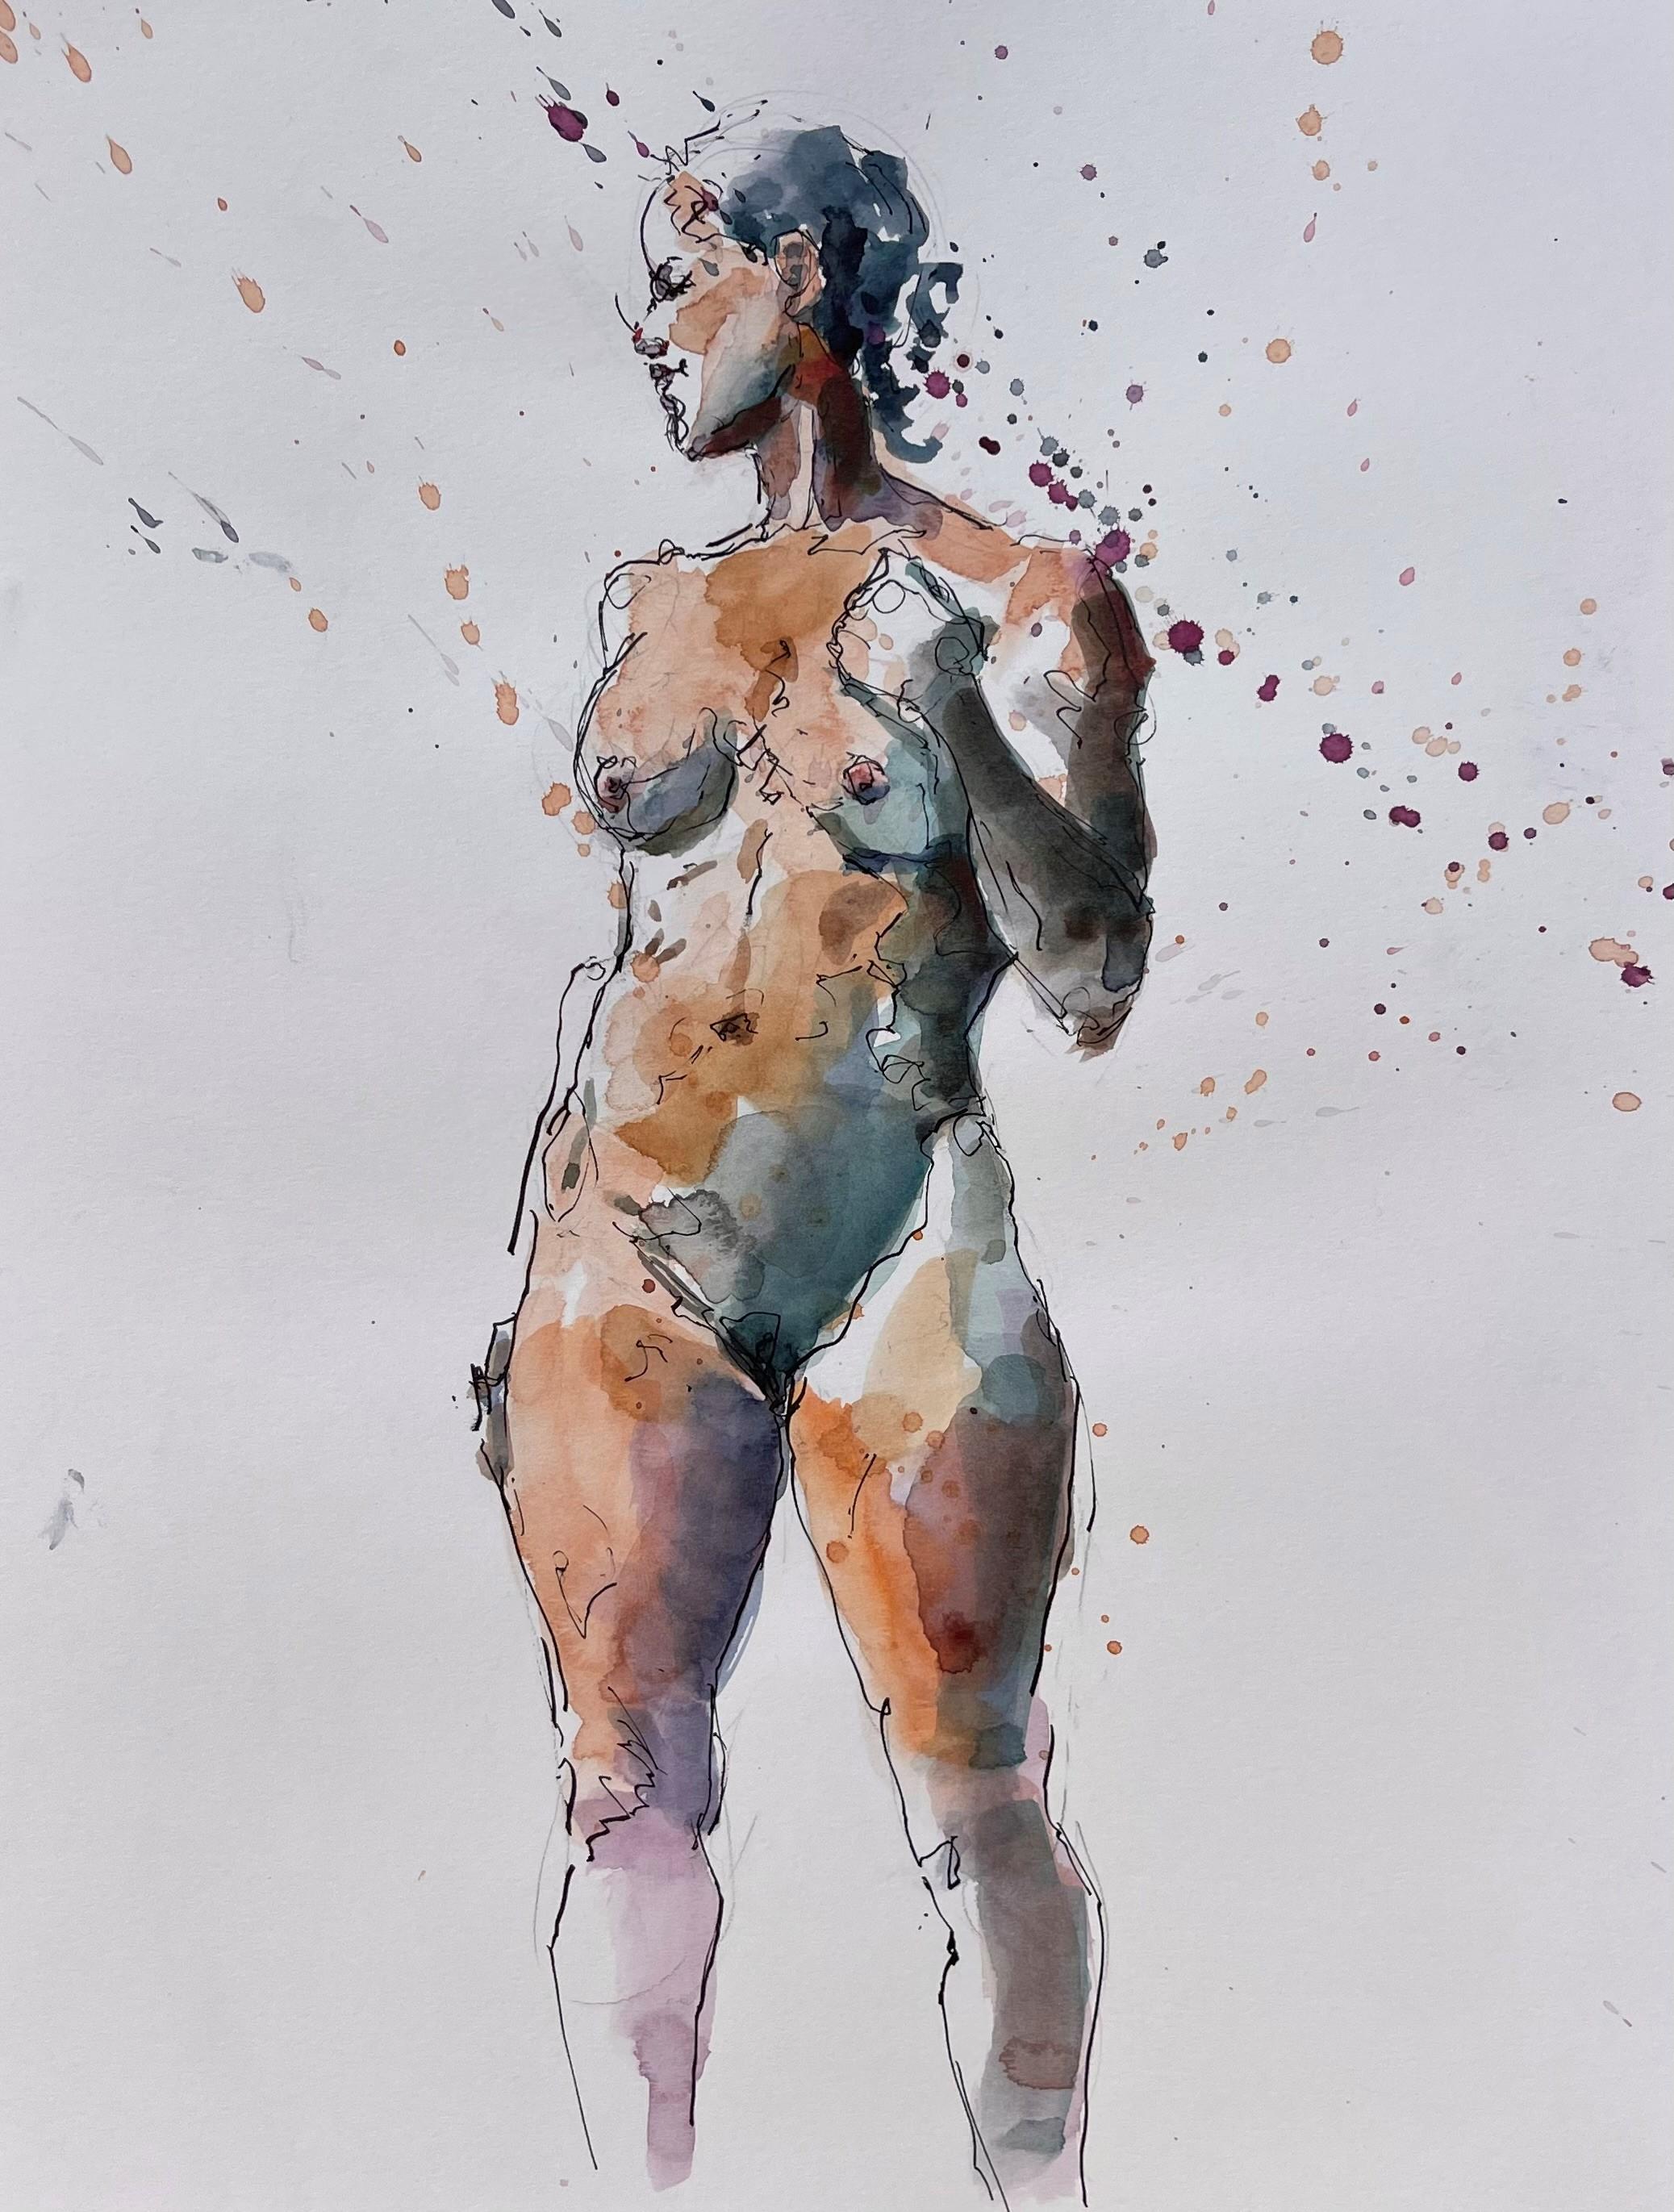 Clyde Steadman Portrait - "Untitled 18, " Watercolor Painting